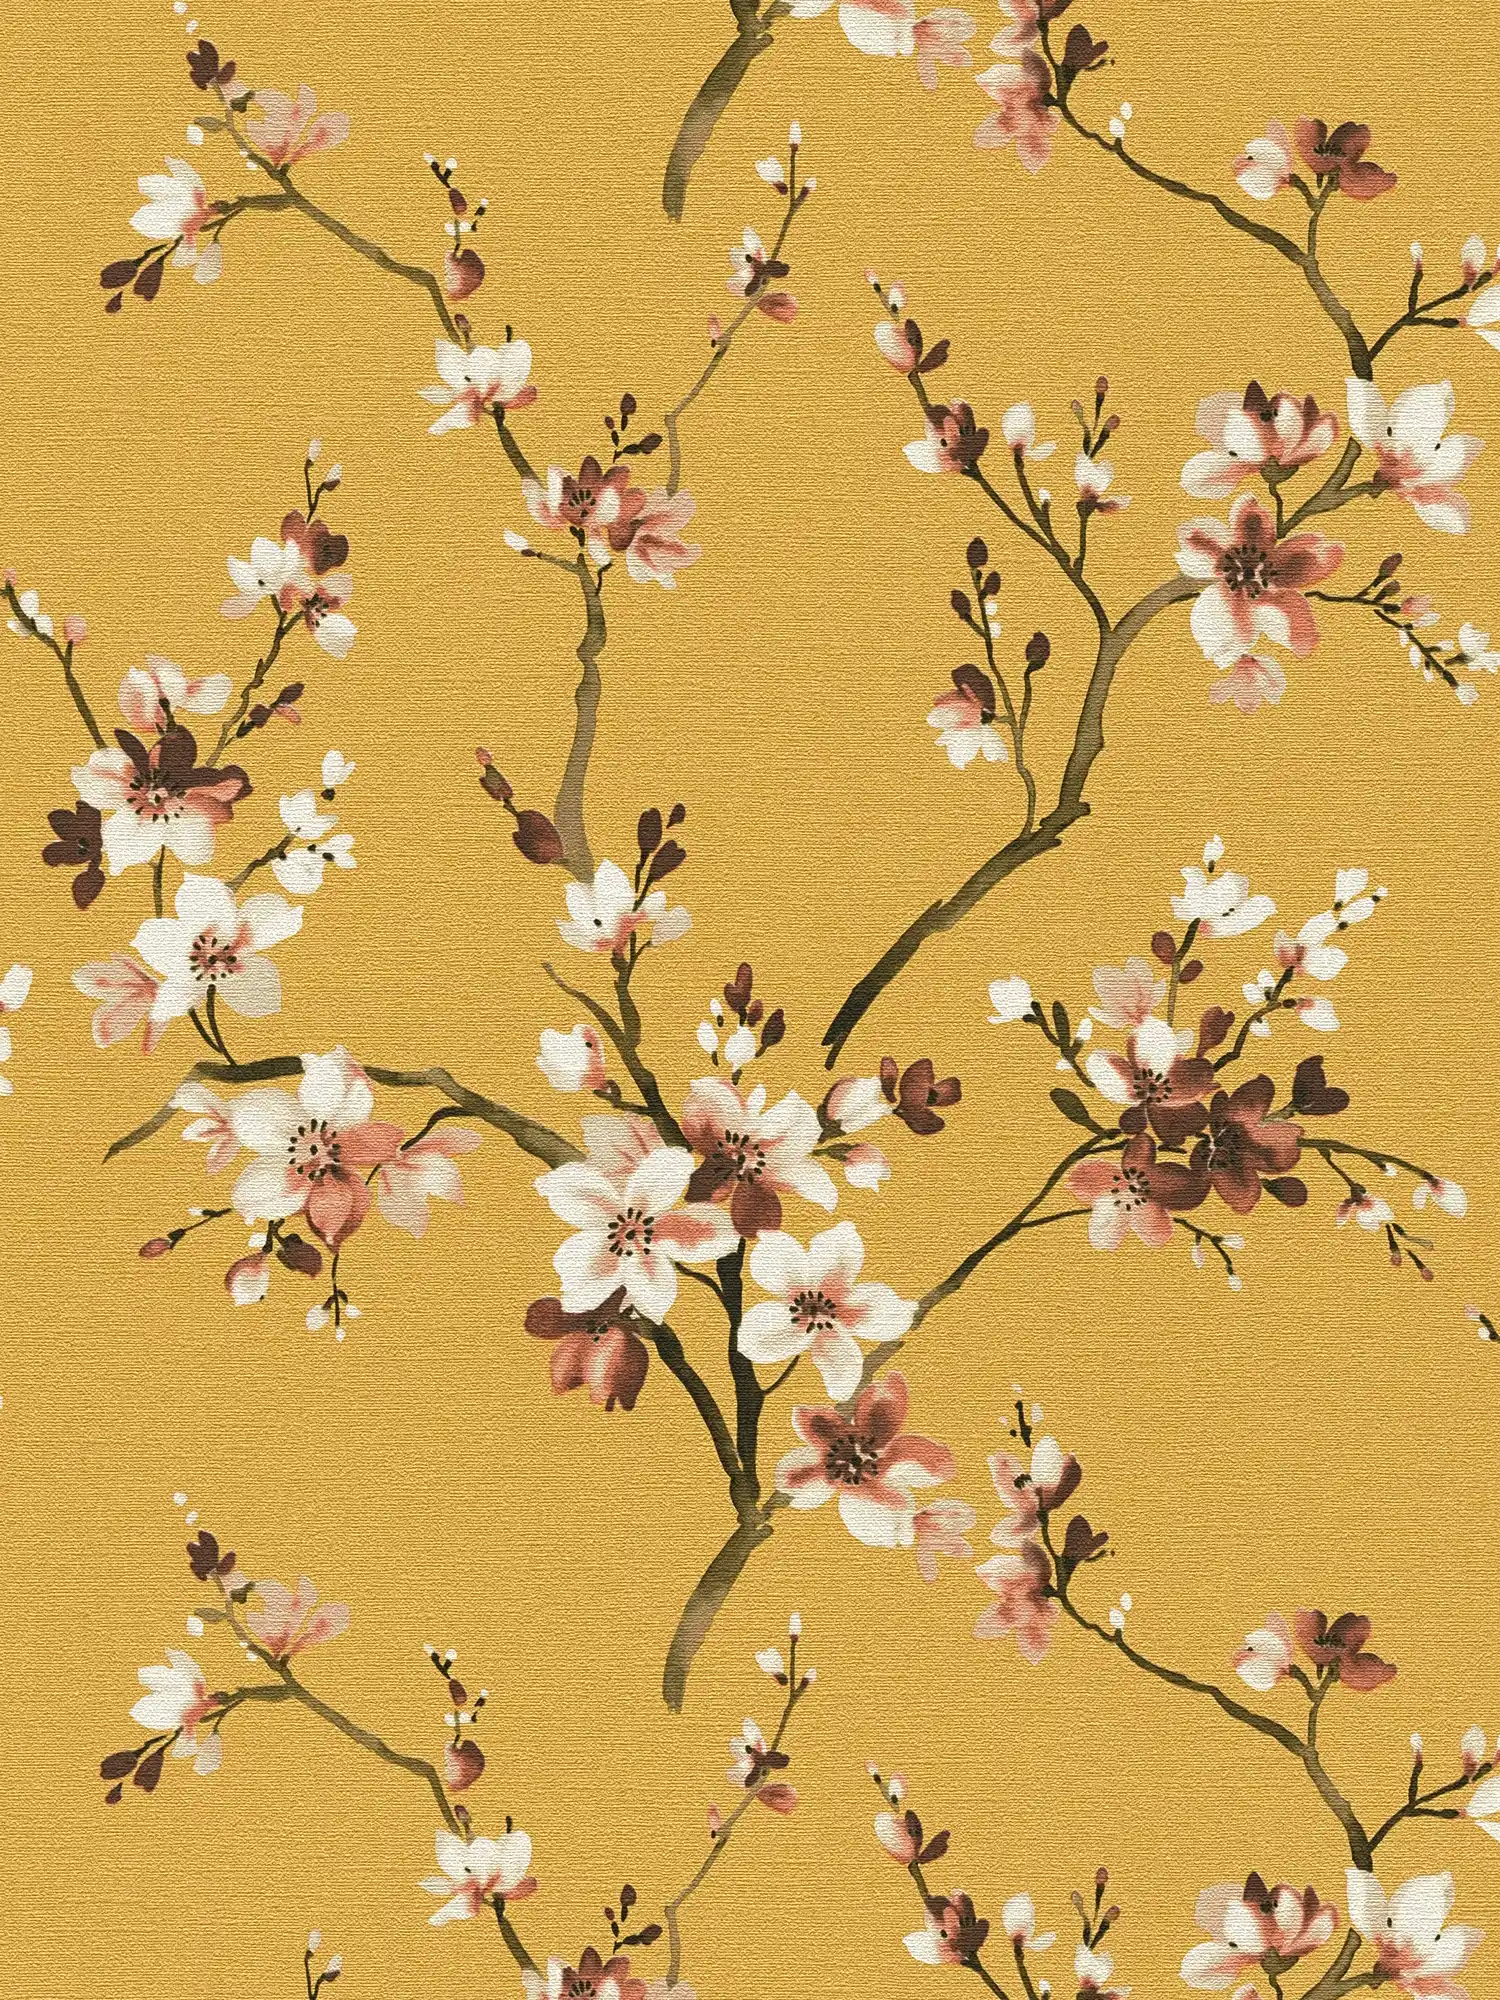 Floral wallpaper mustard yellow with flower branches
